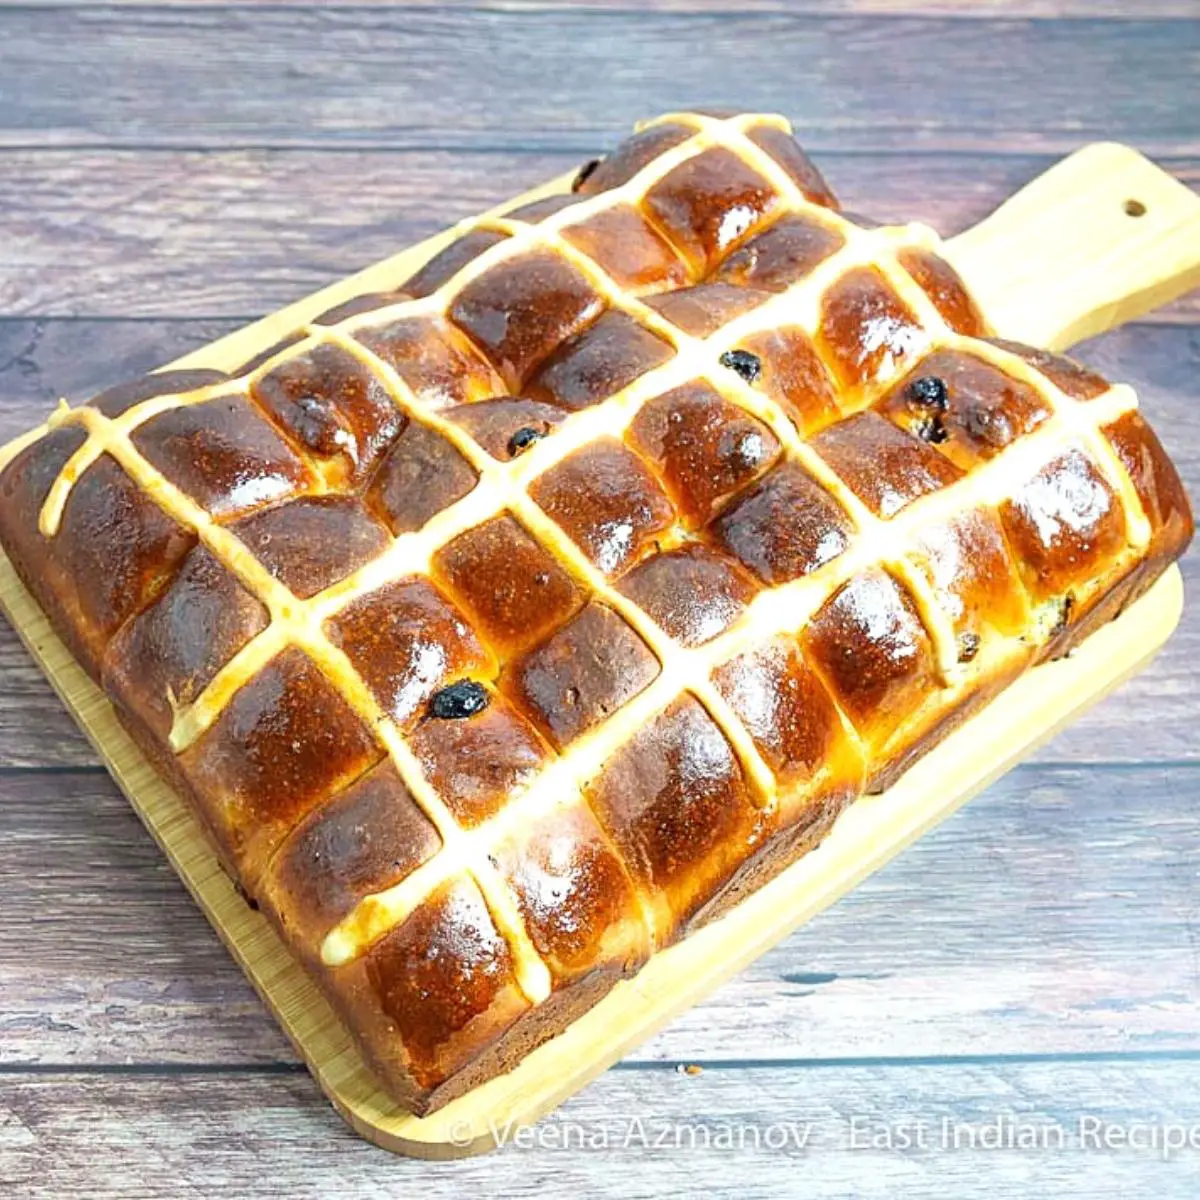 A tray with hot cross buns.